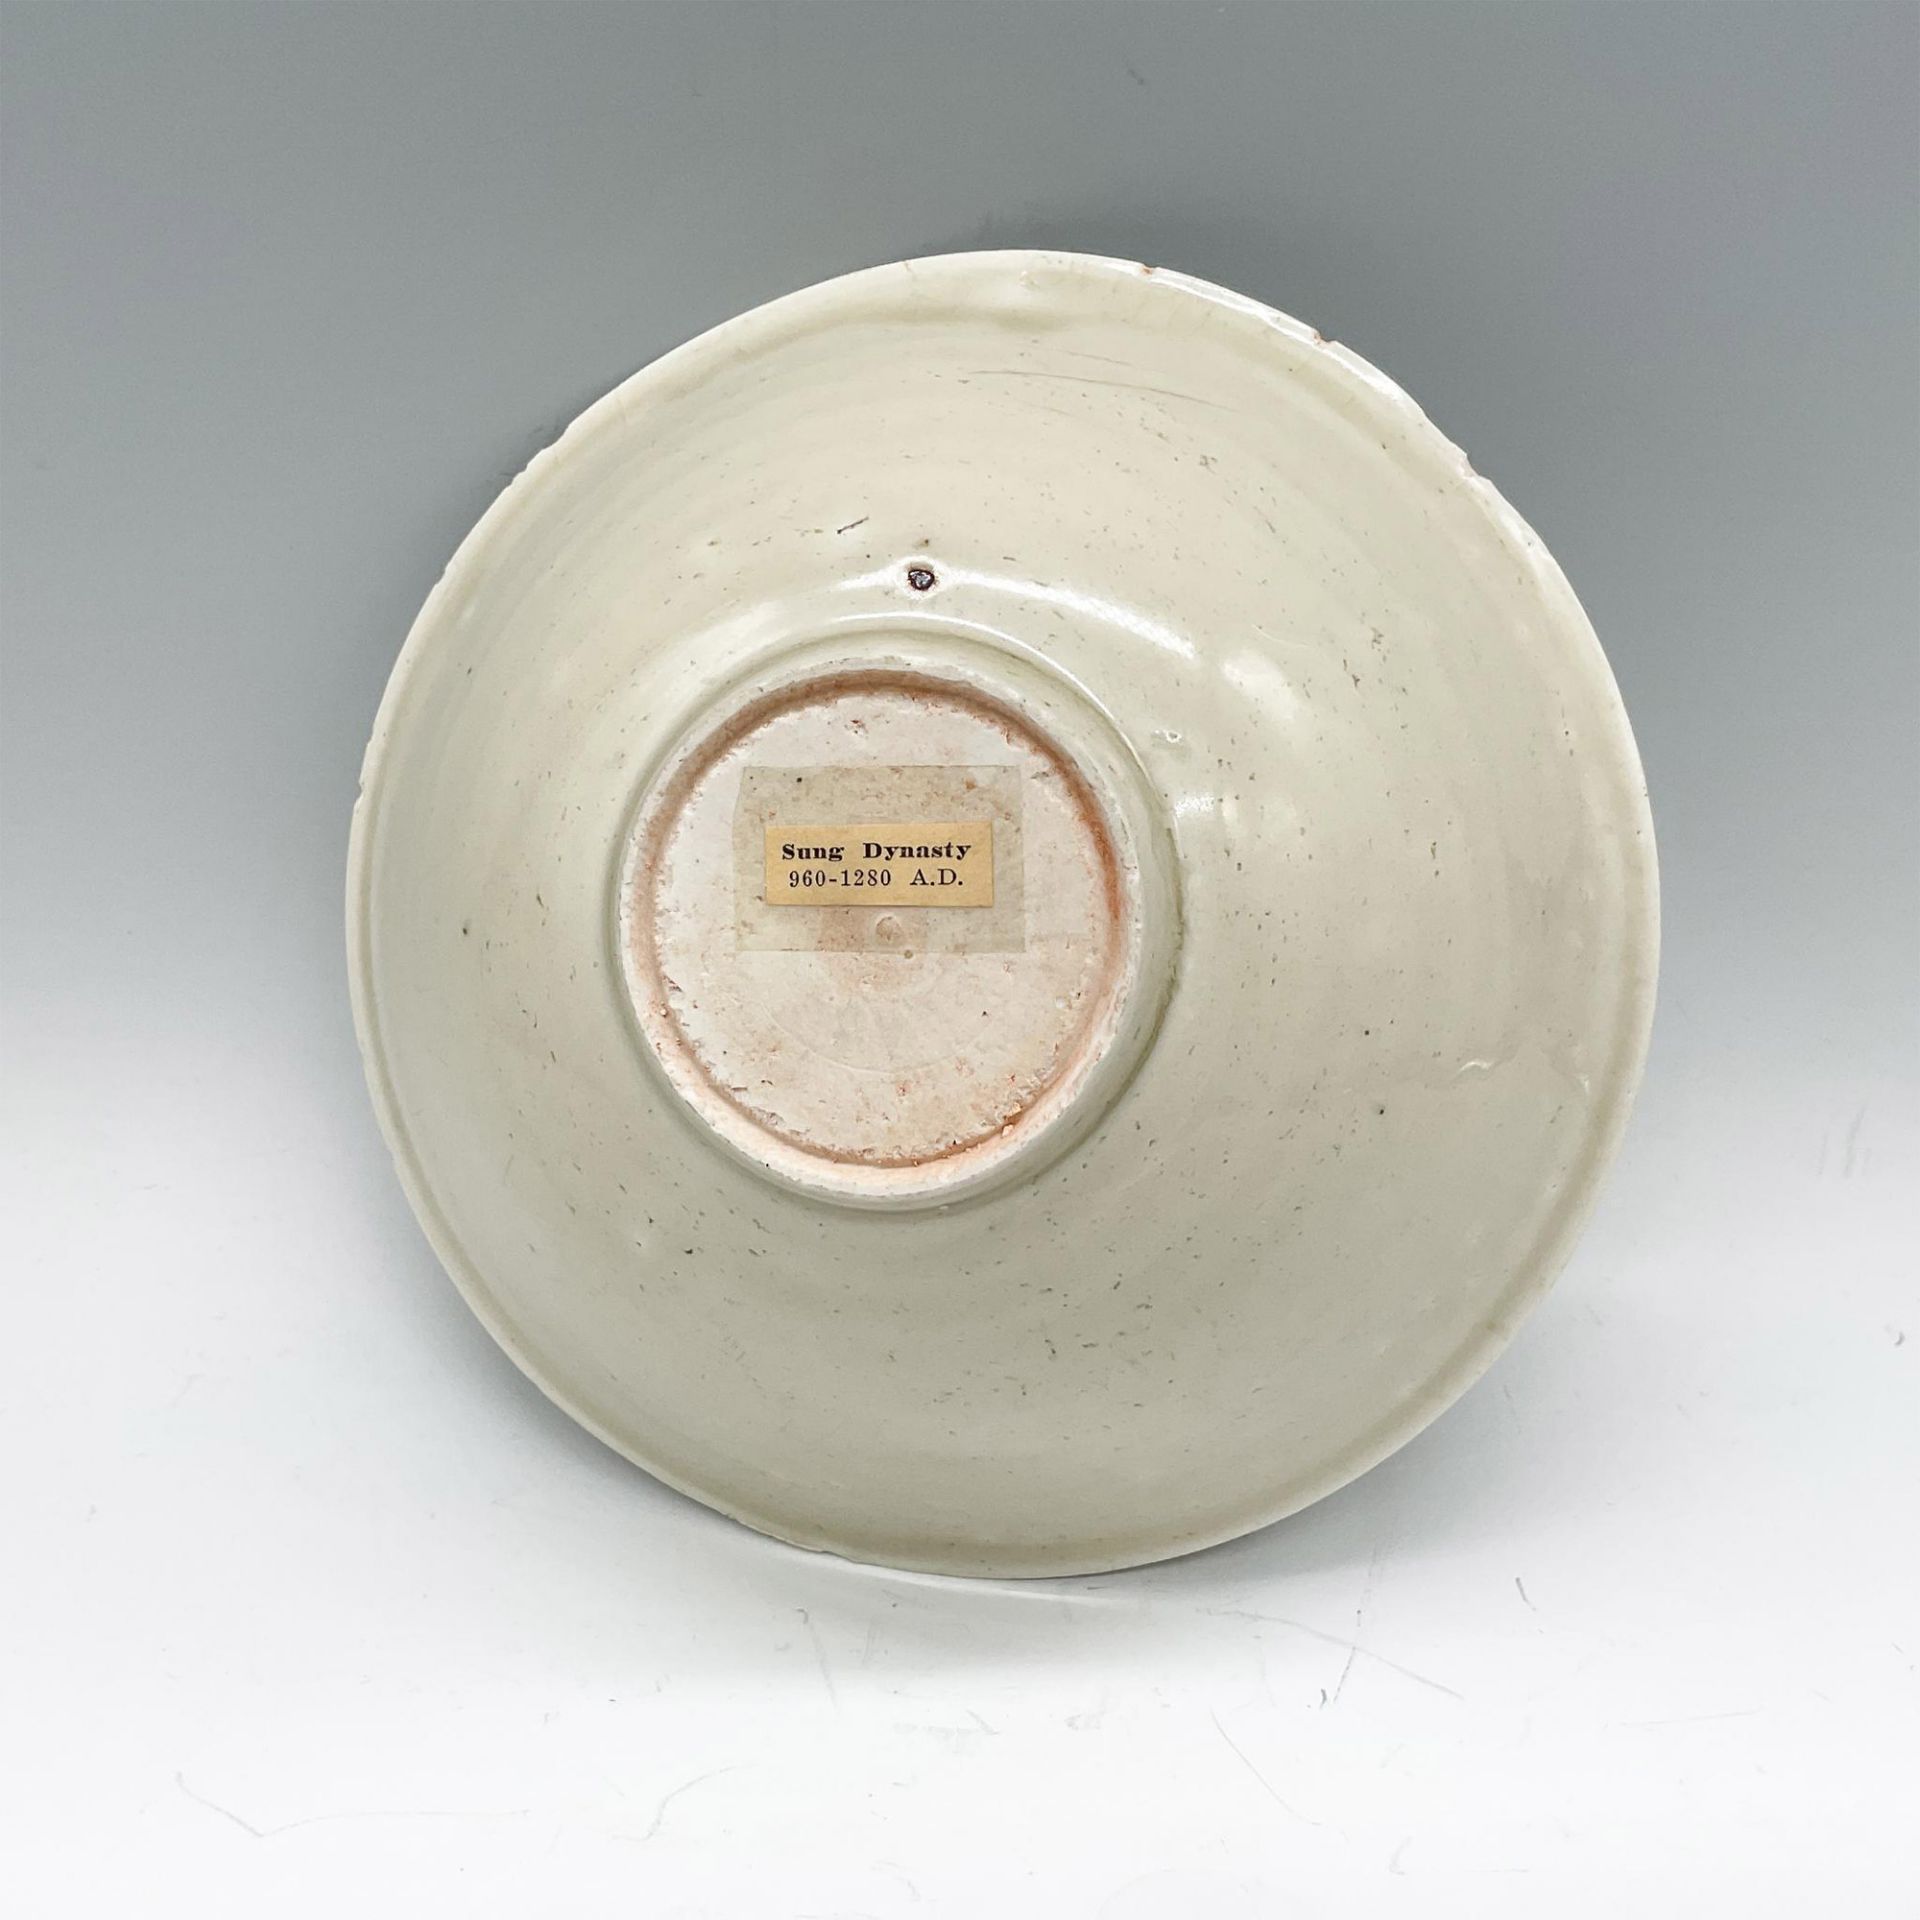 Chinese Sung Dynasty Pottery Rice Bowl - Image 3 of 3